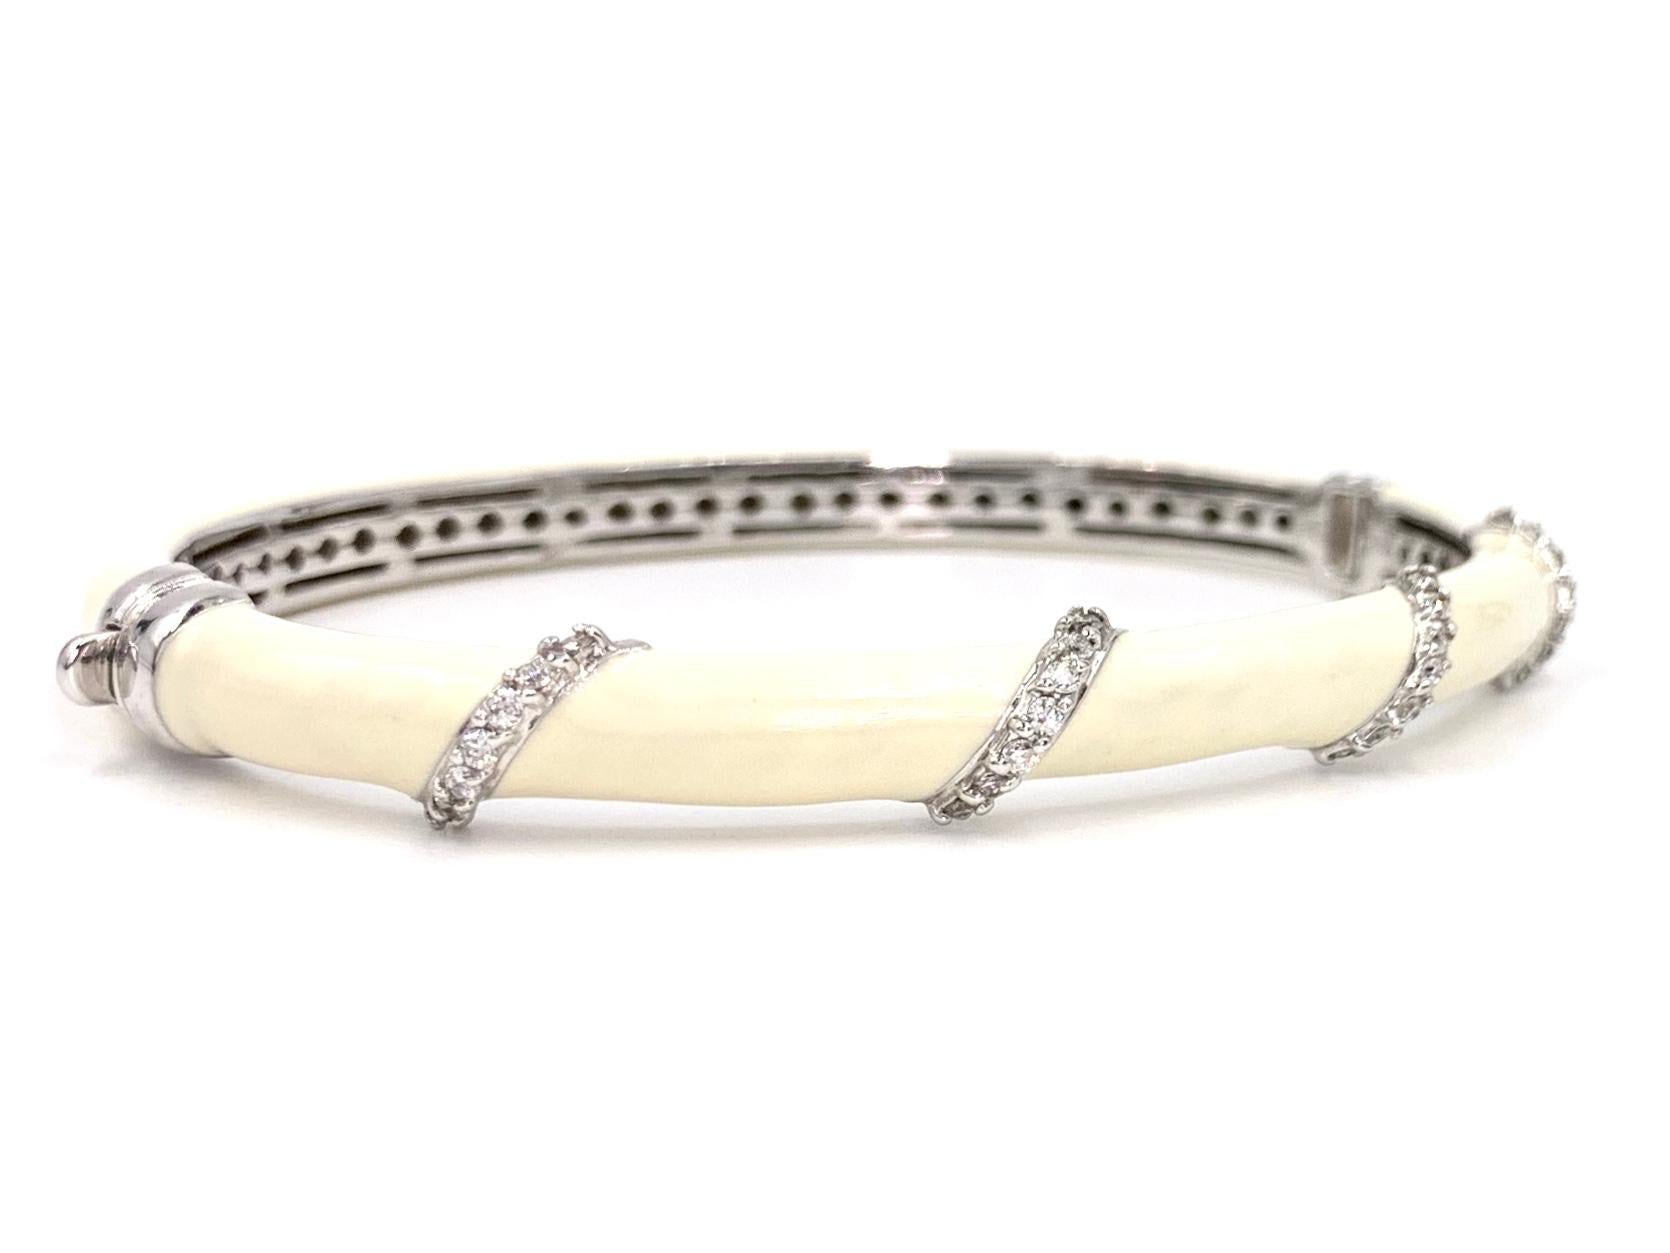 Beautiful and well made 14 karat white gold oval bangle bracelet featuring hand painted ivory/cream color enamel and .35 carats of white diamonds. Diamond quality is approximately G color, VS2 clarity. Bracelet features an easy to use push-button